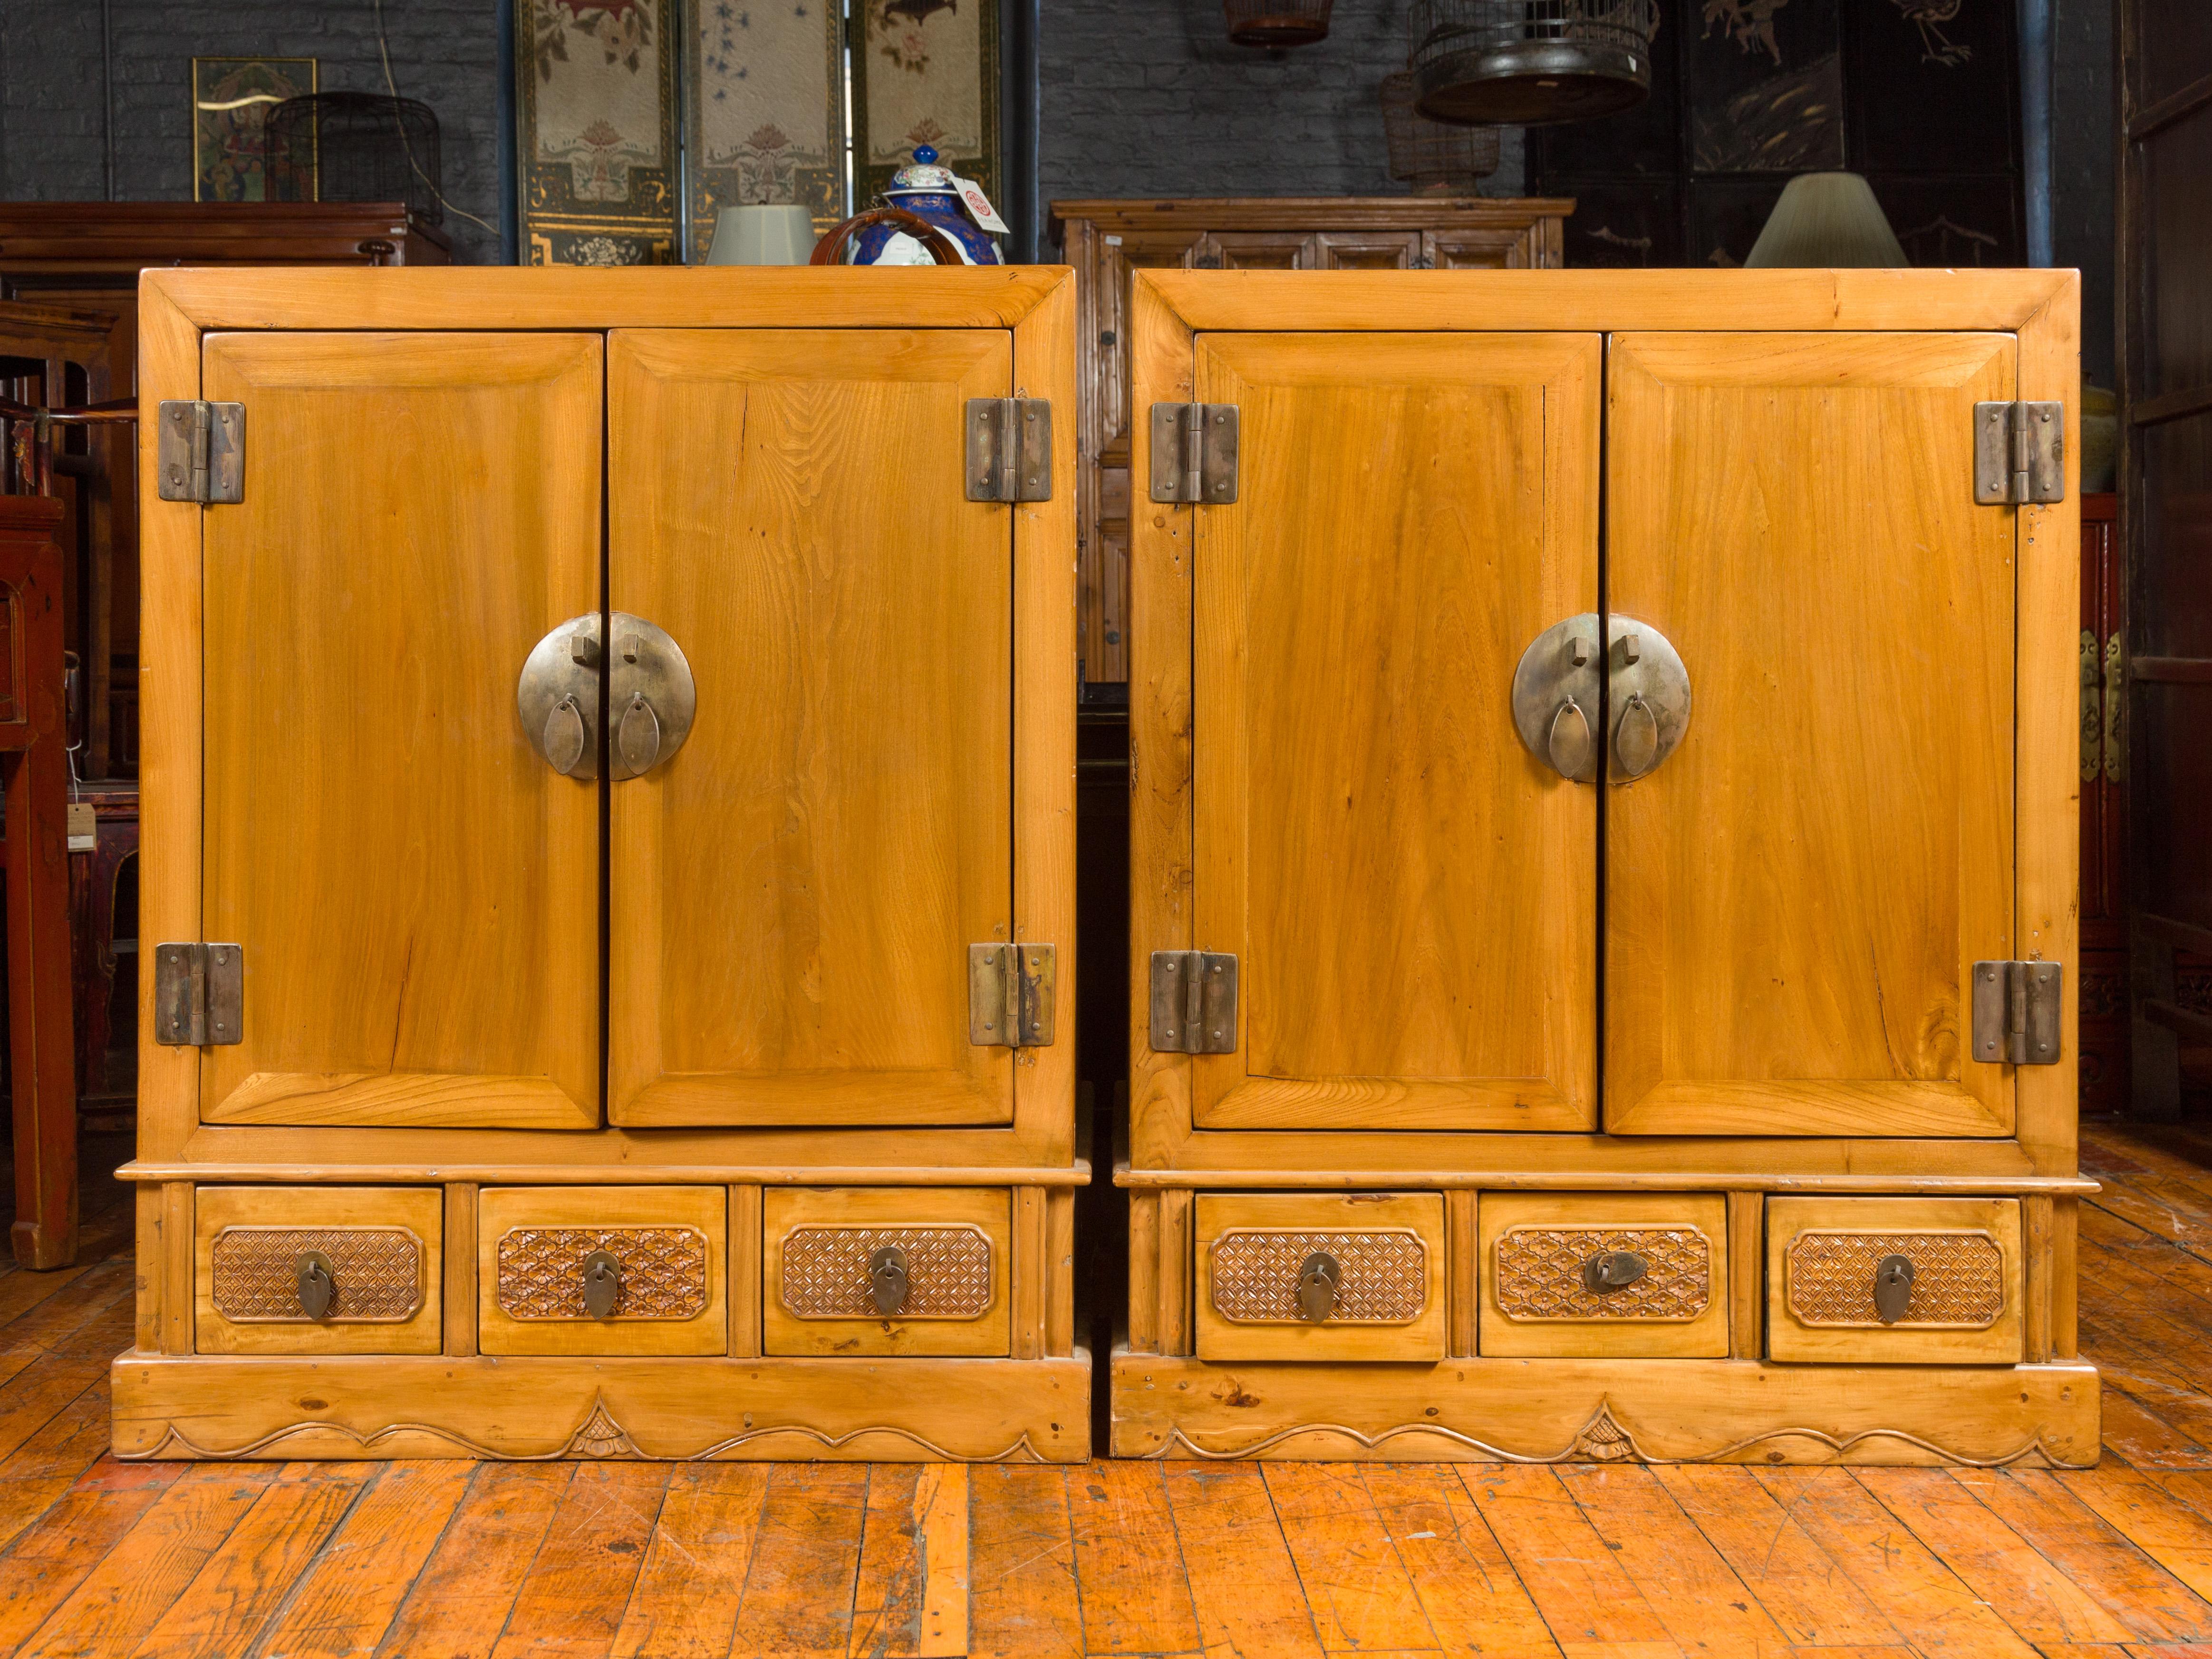 A pair of Chinese Qing Dynasty period yumu wood cabinets from the 19th century, with double doors, drawers and carved motifs. This pair of Chinese Qing Dynasty yumu wood cabinets from the 19th century offers a blend of traditional elegance and